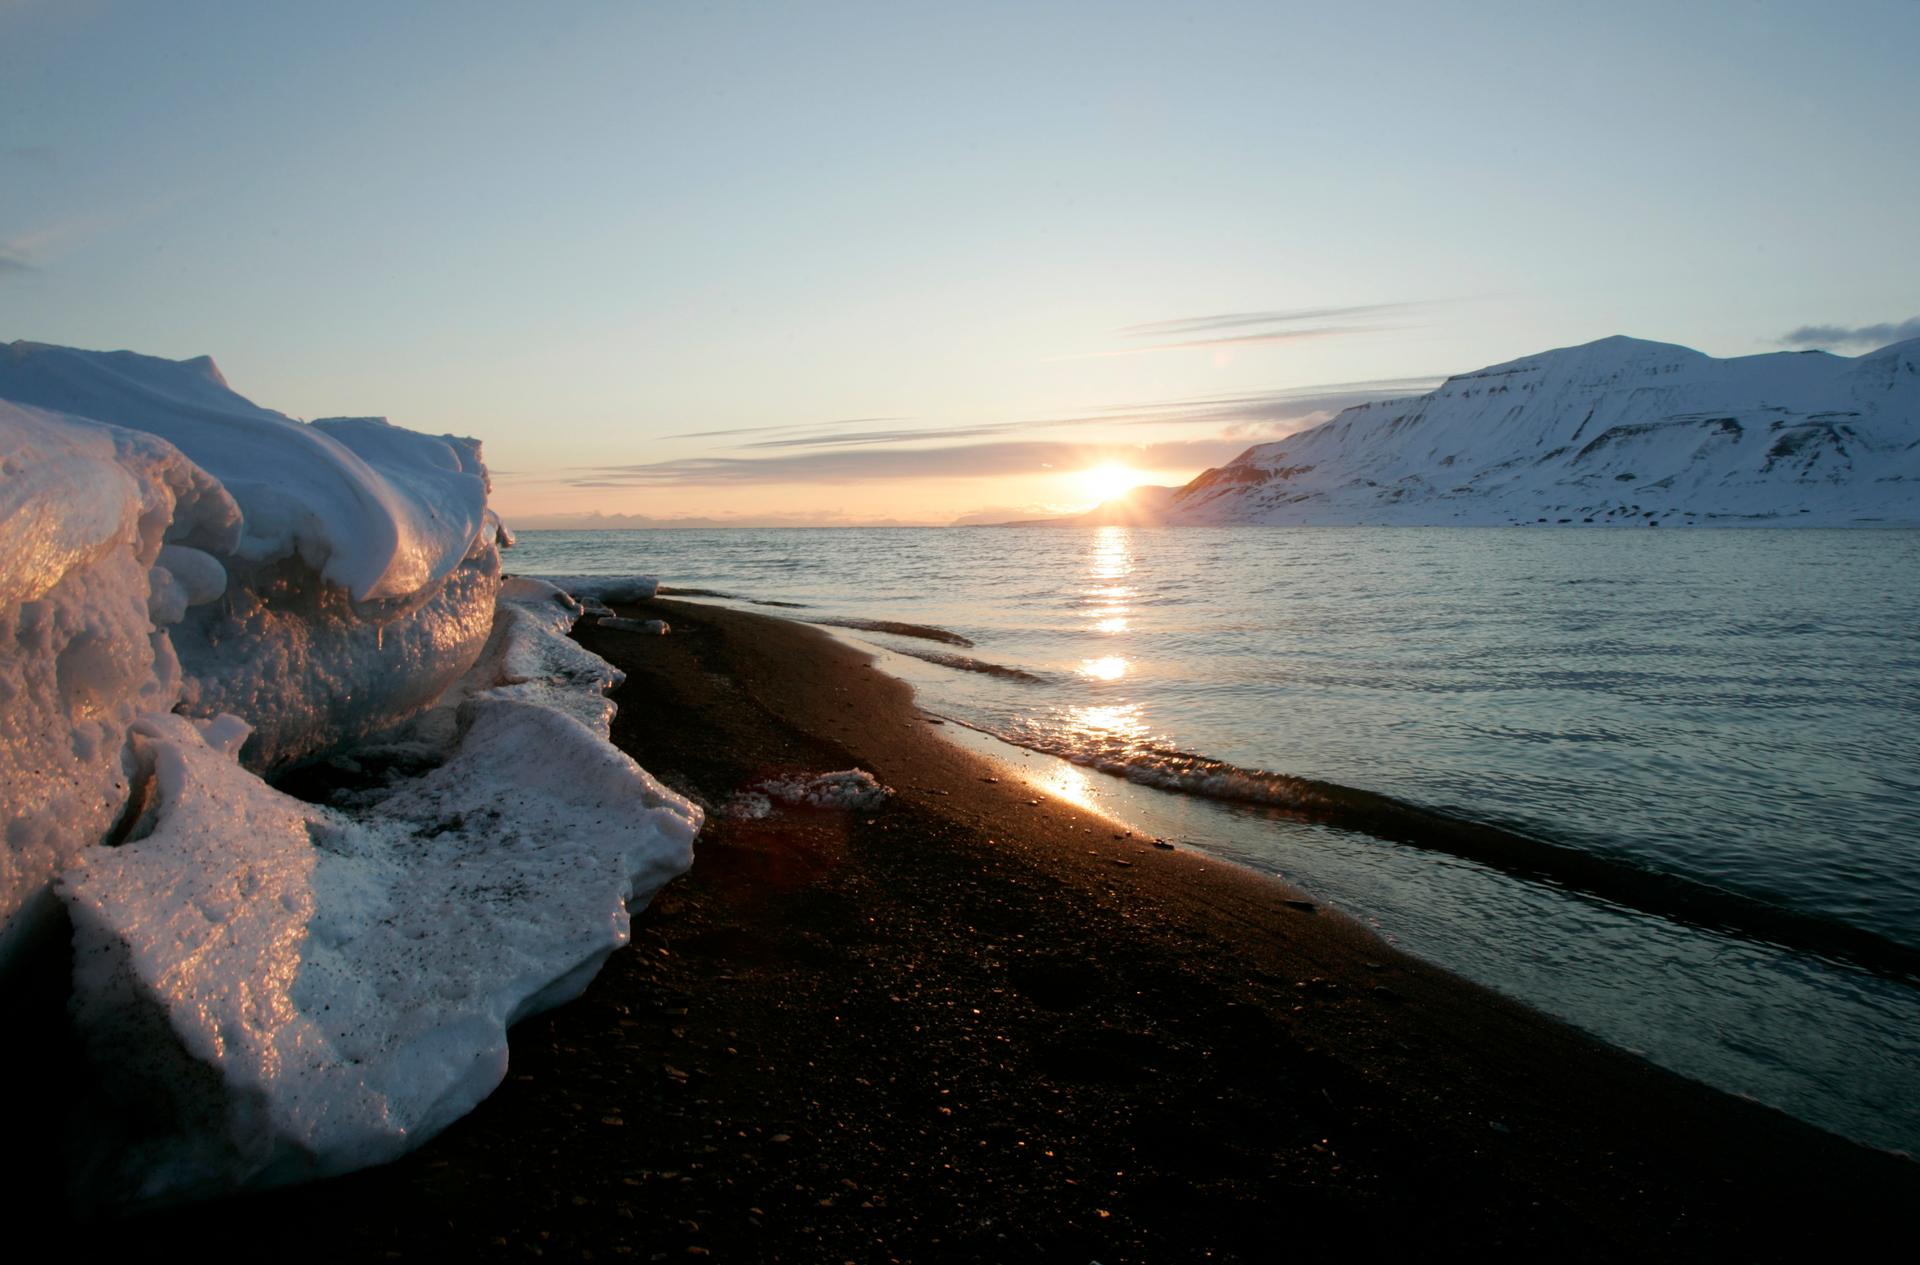 The sun sits above the horizon over melting ice in the arctic by the ocean in the arctic.